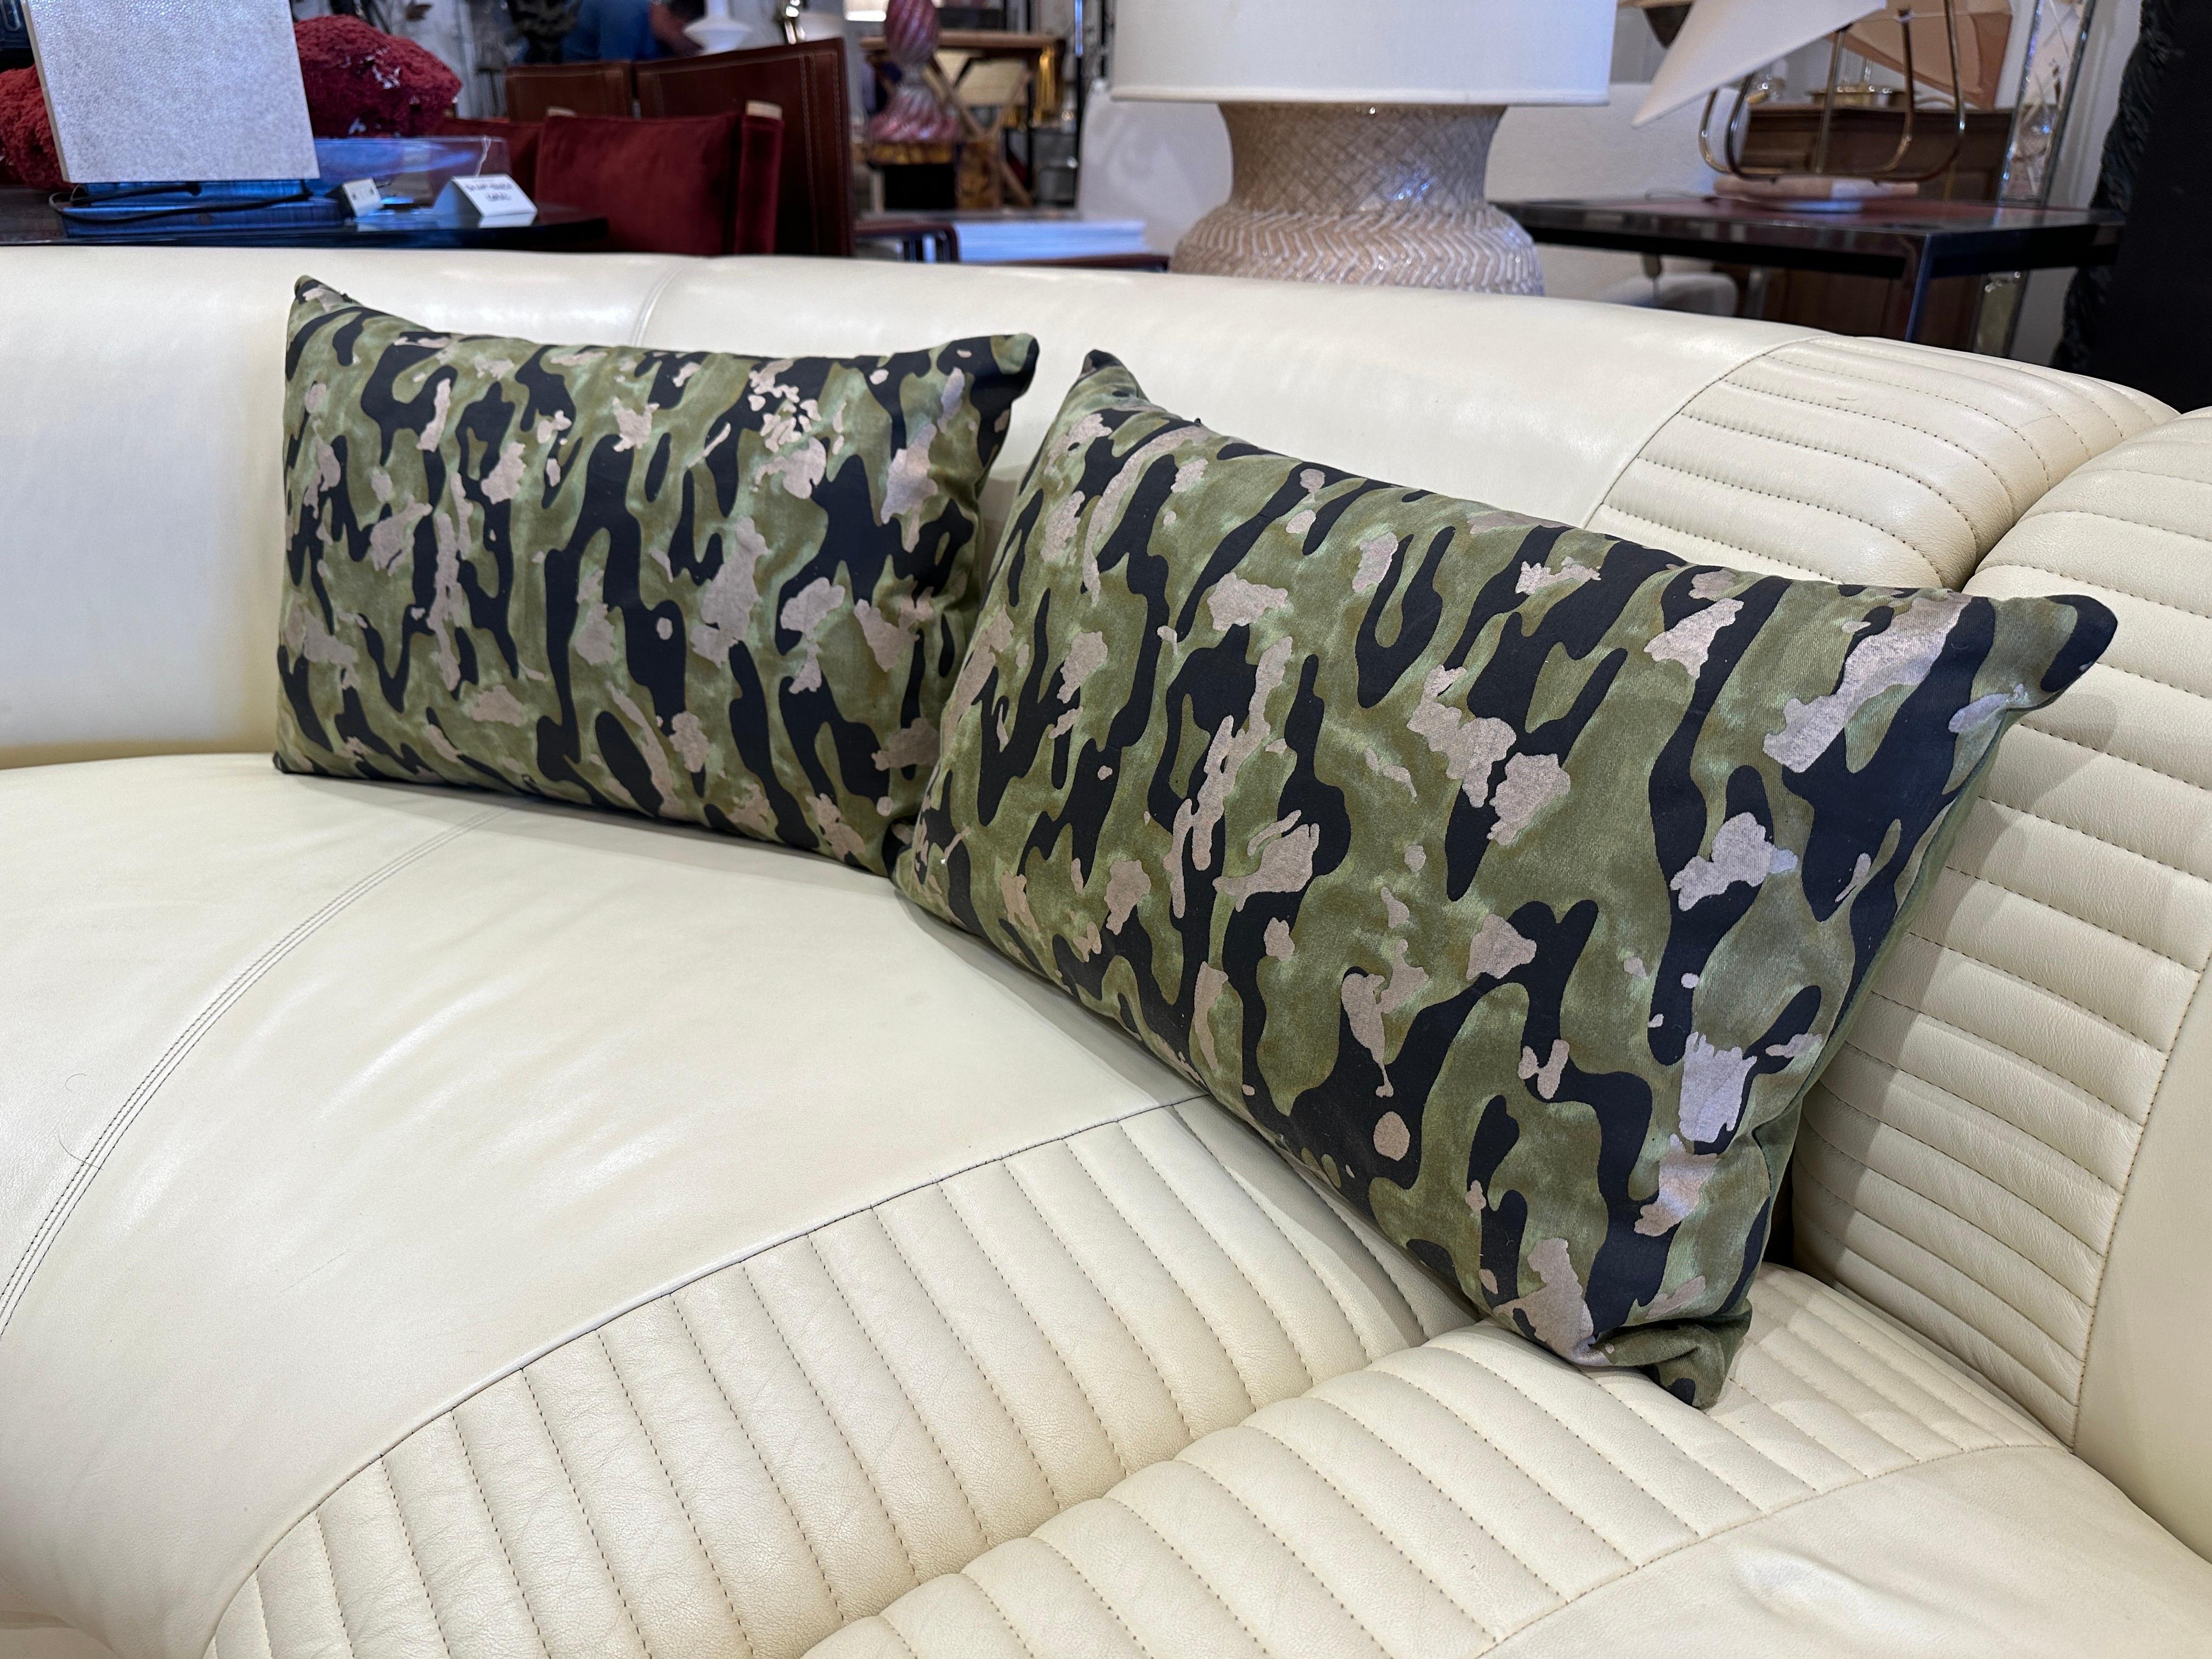 Camo Isole fabric by Fortuny of Venice, Italy. This soft yet chic camouflage fabric with complimentary color backing. This is a one-of-a-kind custom designed pillow. This is filled with down. This pretty throw pillow cushion is handmade using